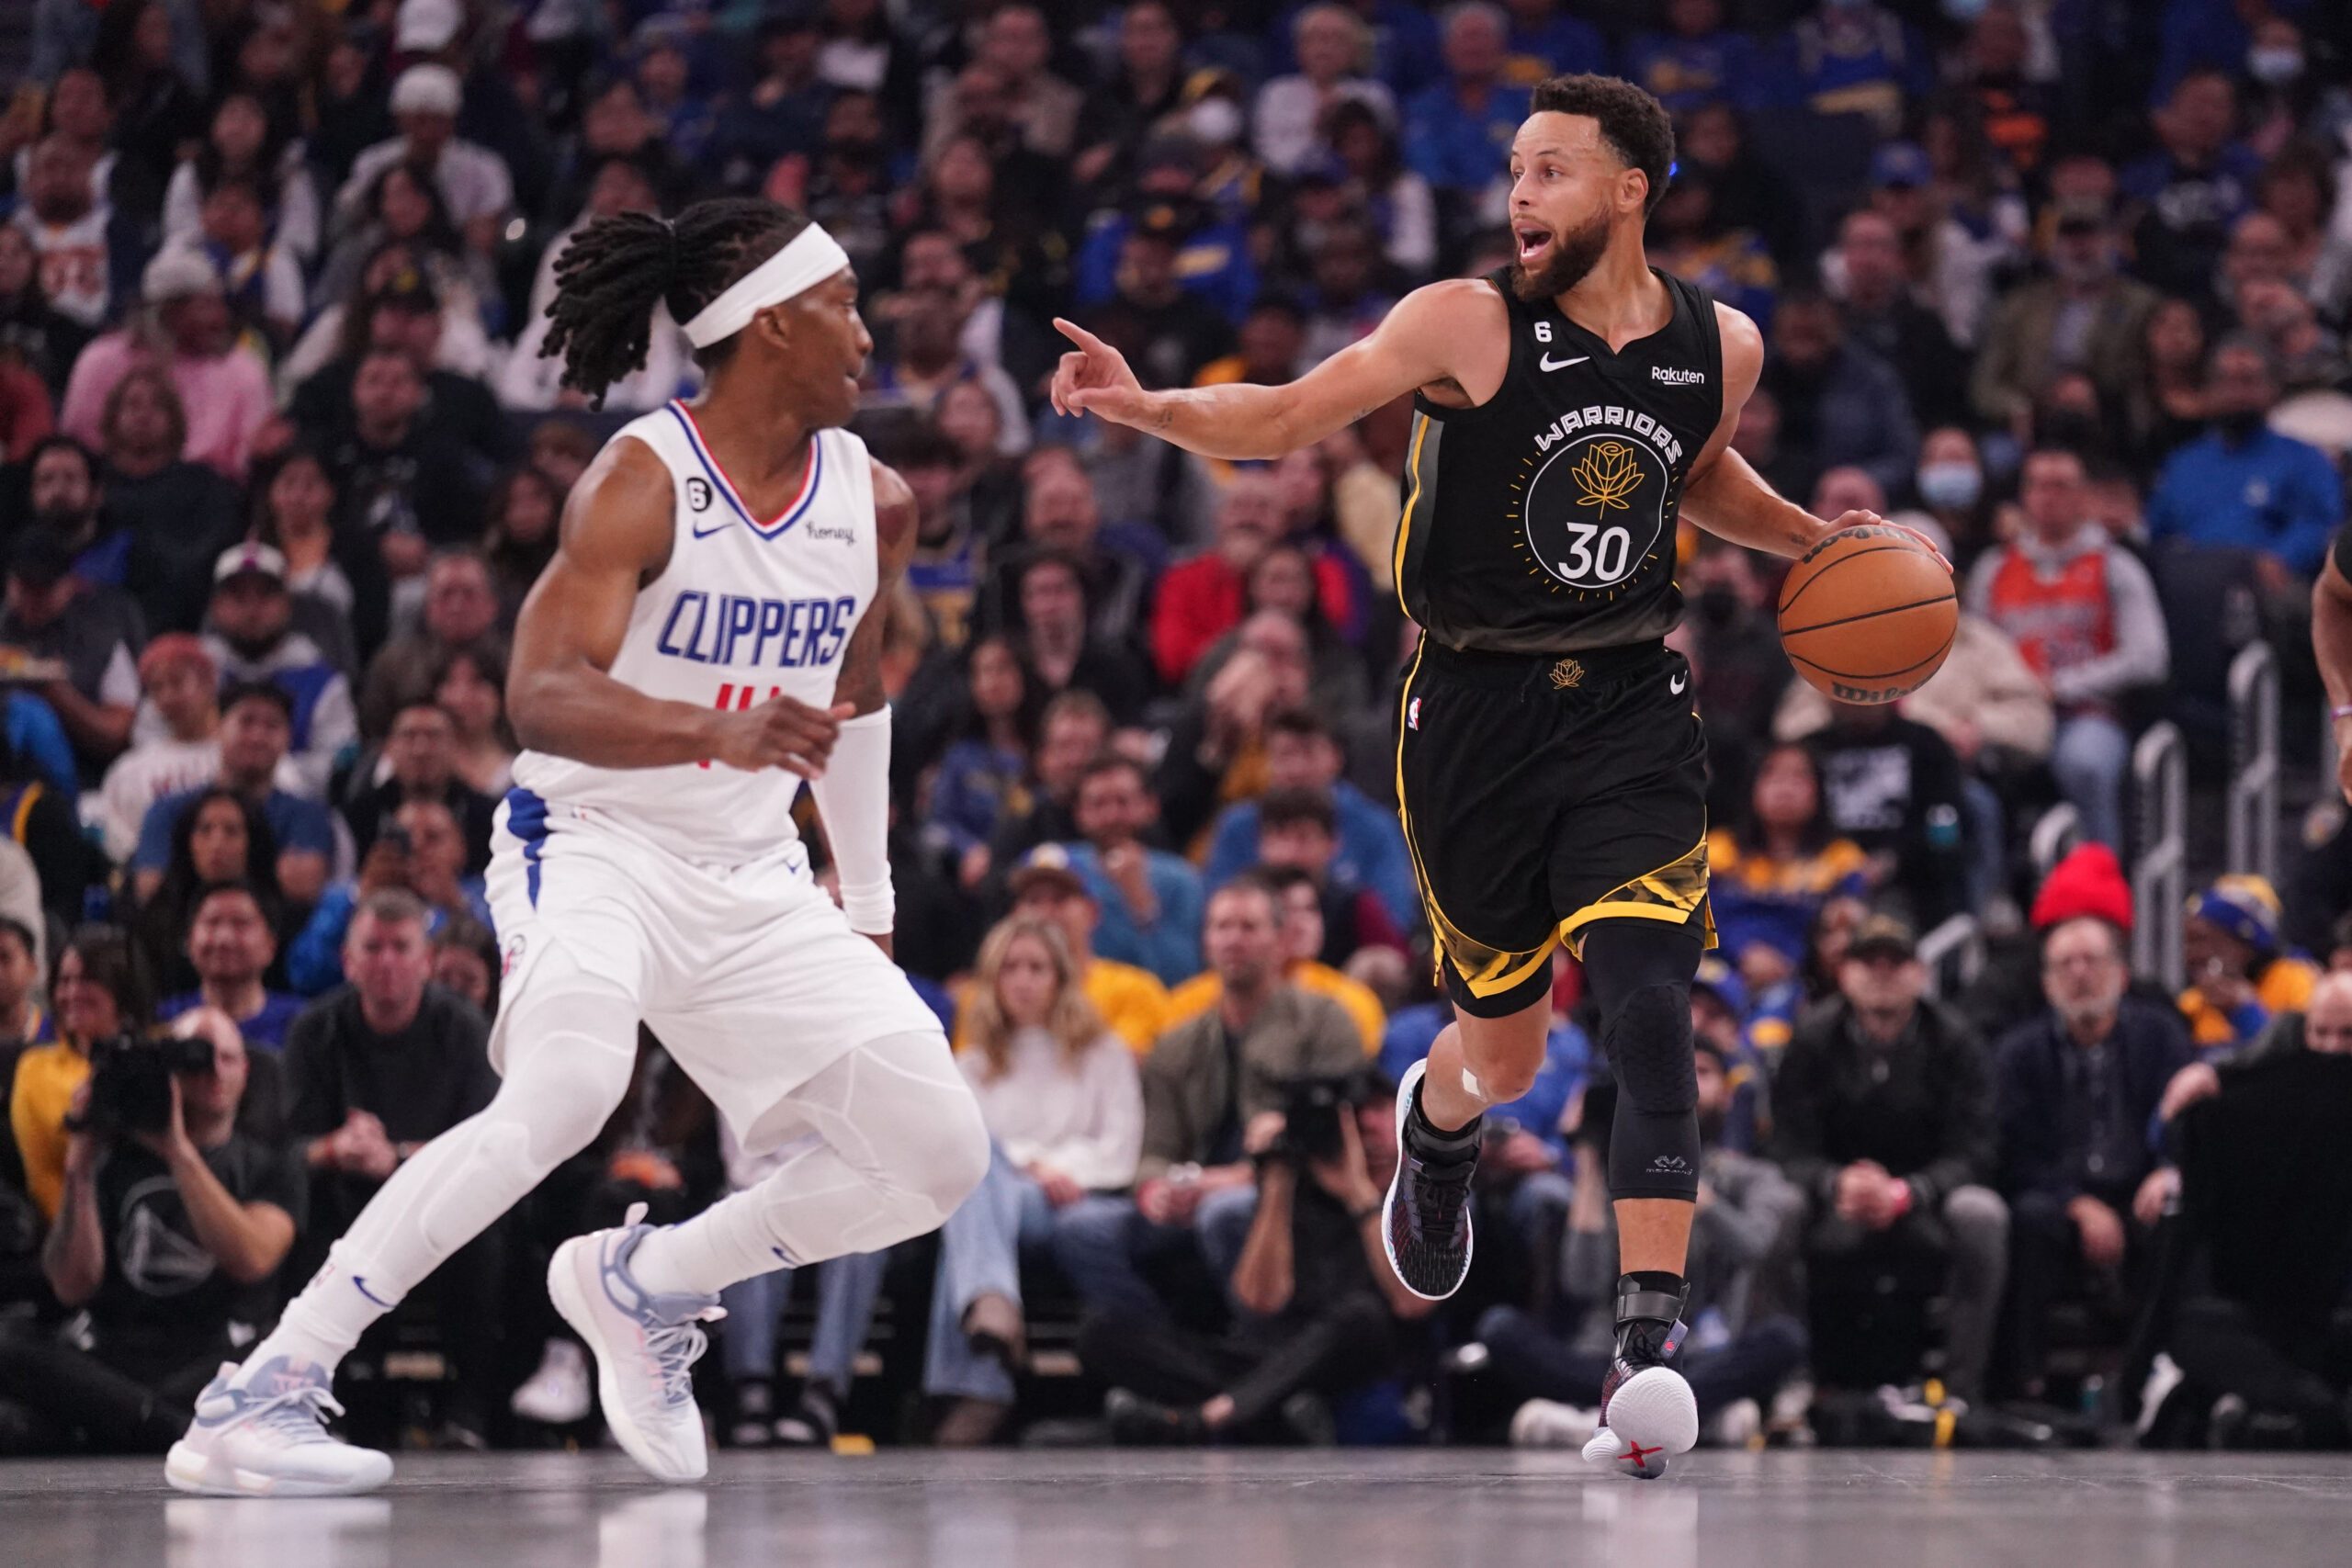 Curry, Thompson return as Wiggins erupts for 31 in Warriors’ rout of Clippers